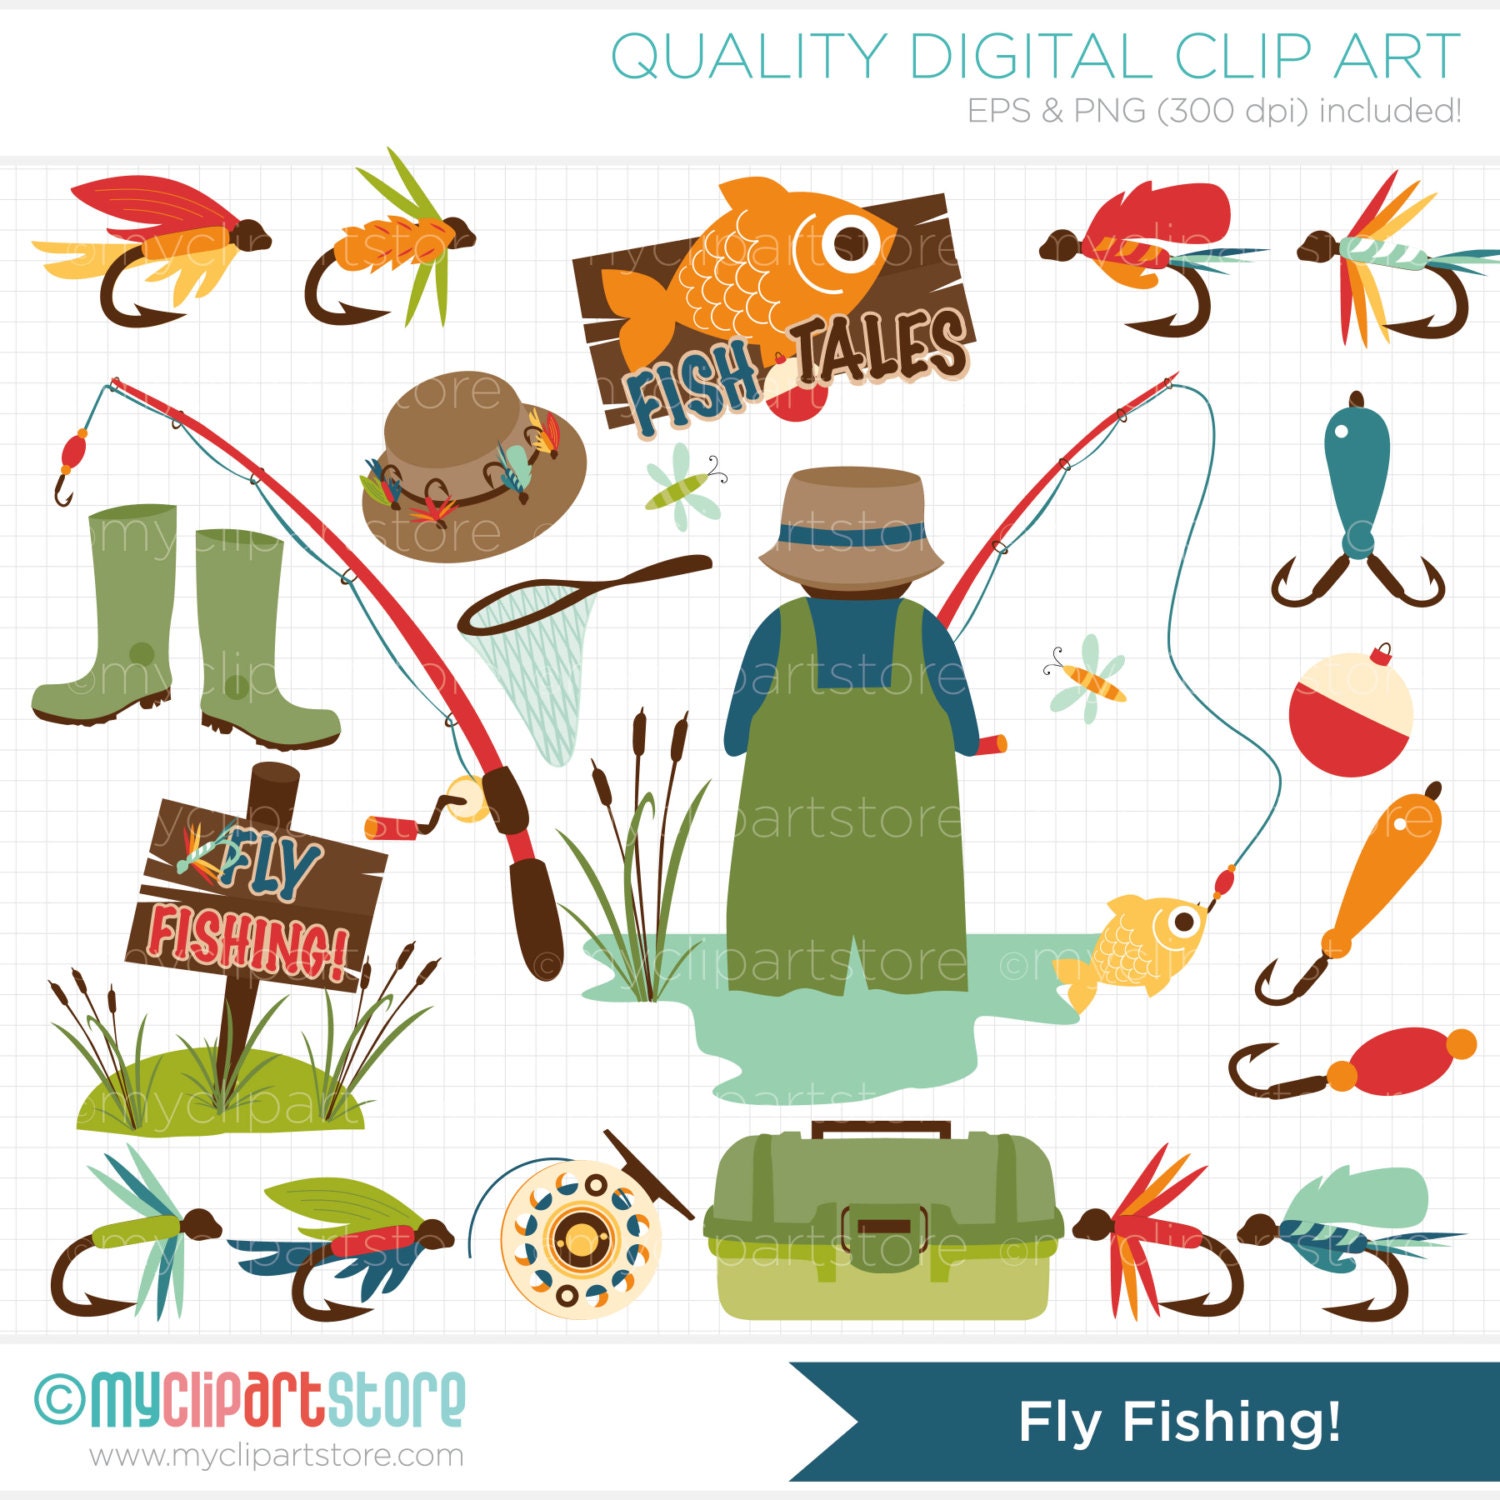 Father's Day / Fly Fishing Clip Art / Digital by MyClipArtStore